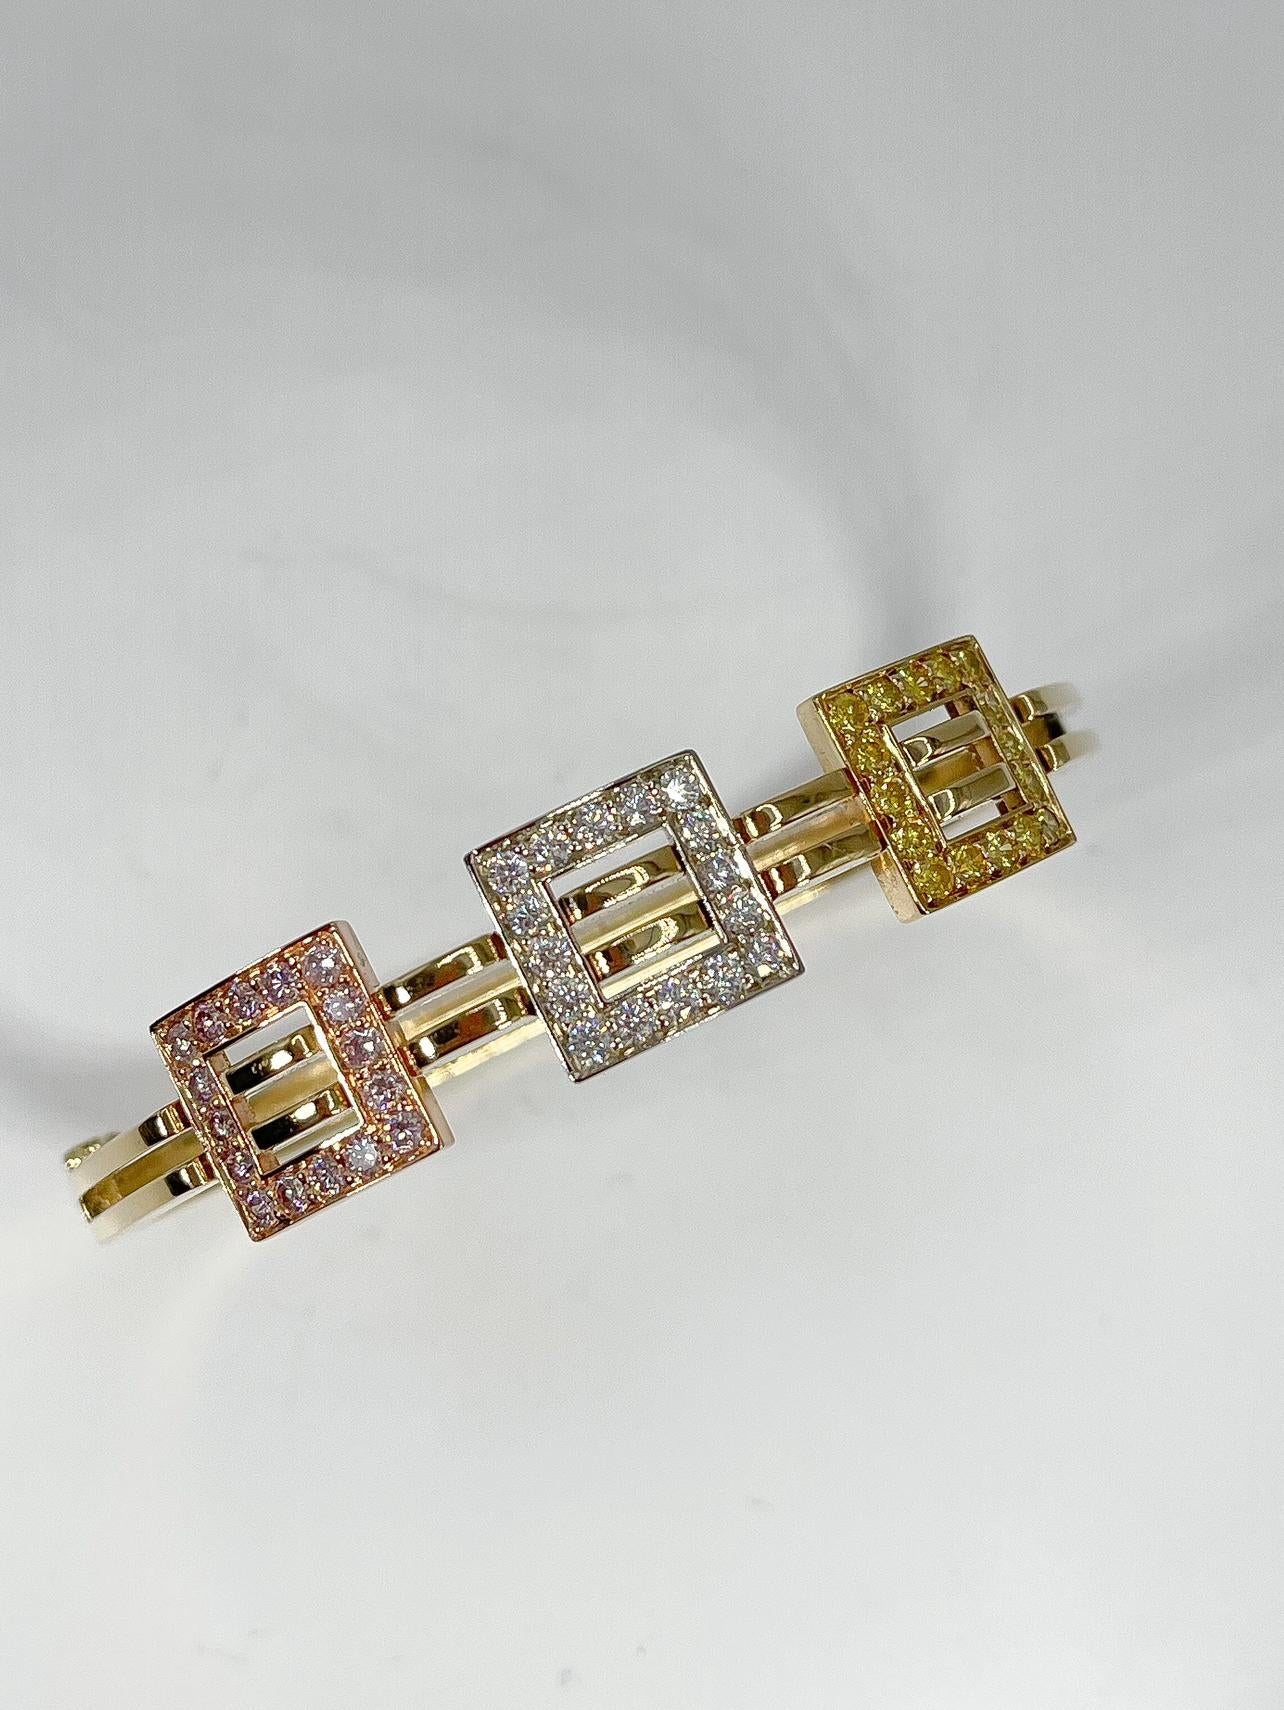 This 18k yellow gold bangle Coffin & Trout has a yellow, white, and rose gold accent with yellow white, and pink diamonds (1.90 CTW VS2 G color). The bracelet has in inside diameter of 7 inches and has a weight of 37.15 grams. Bracelet has a figure